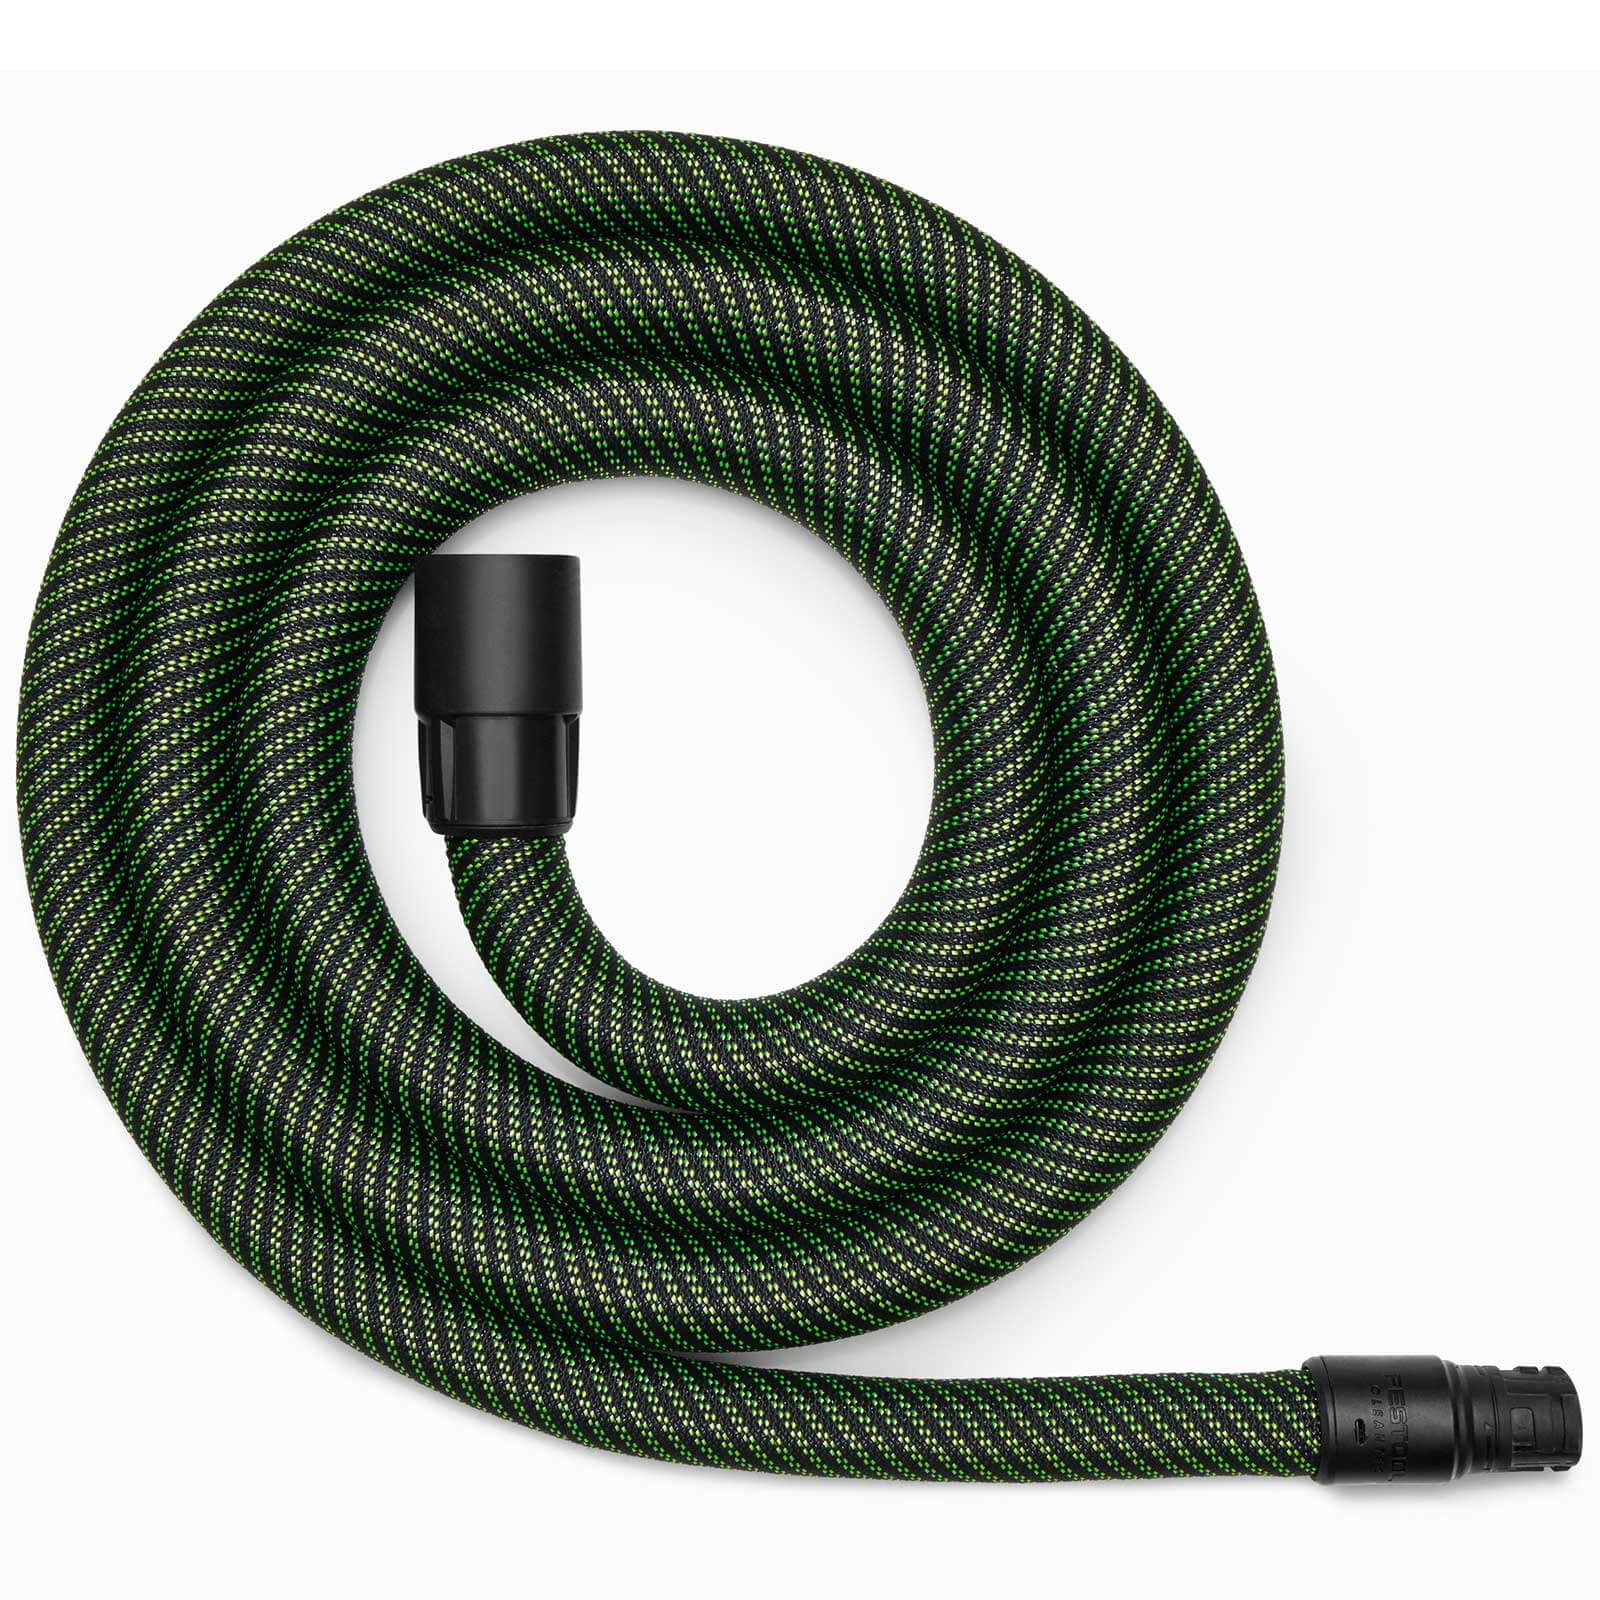 Photo of Festool D27/32x5m-as Ctr Dust Extractor Suction Hose 5m